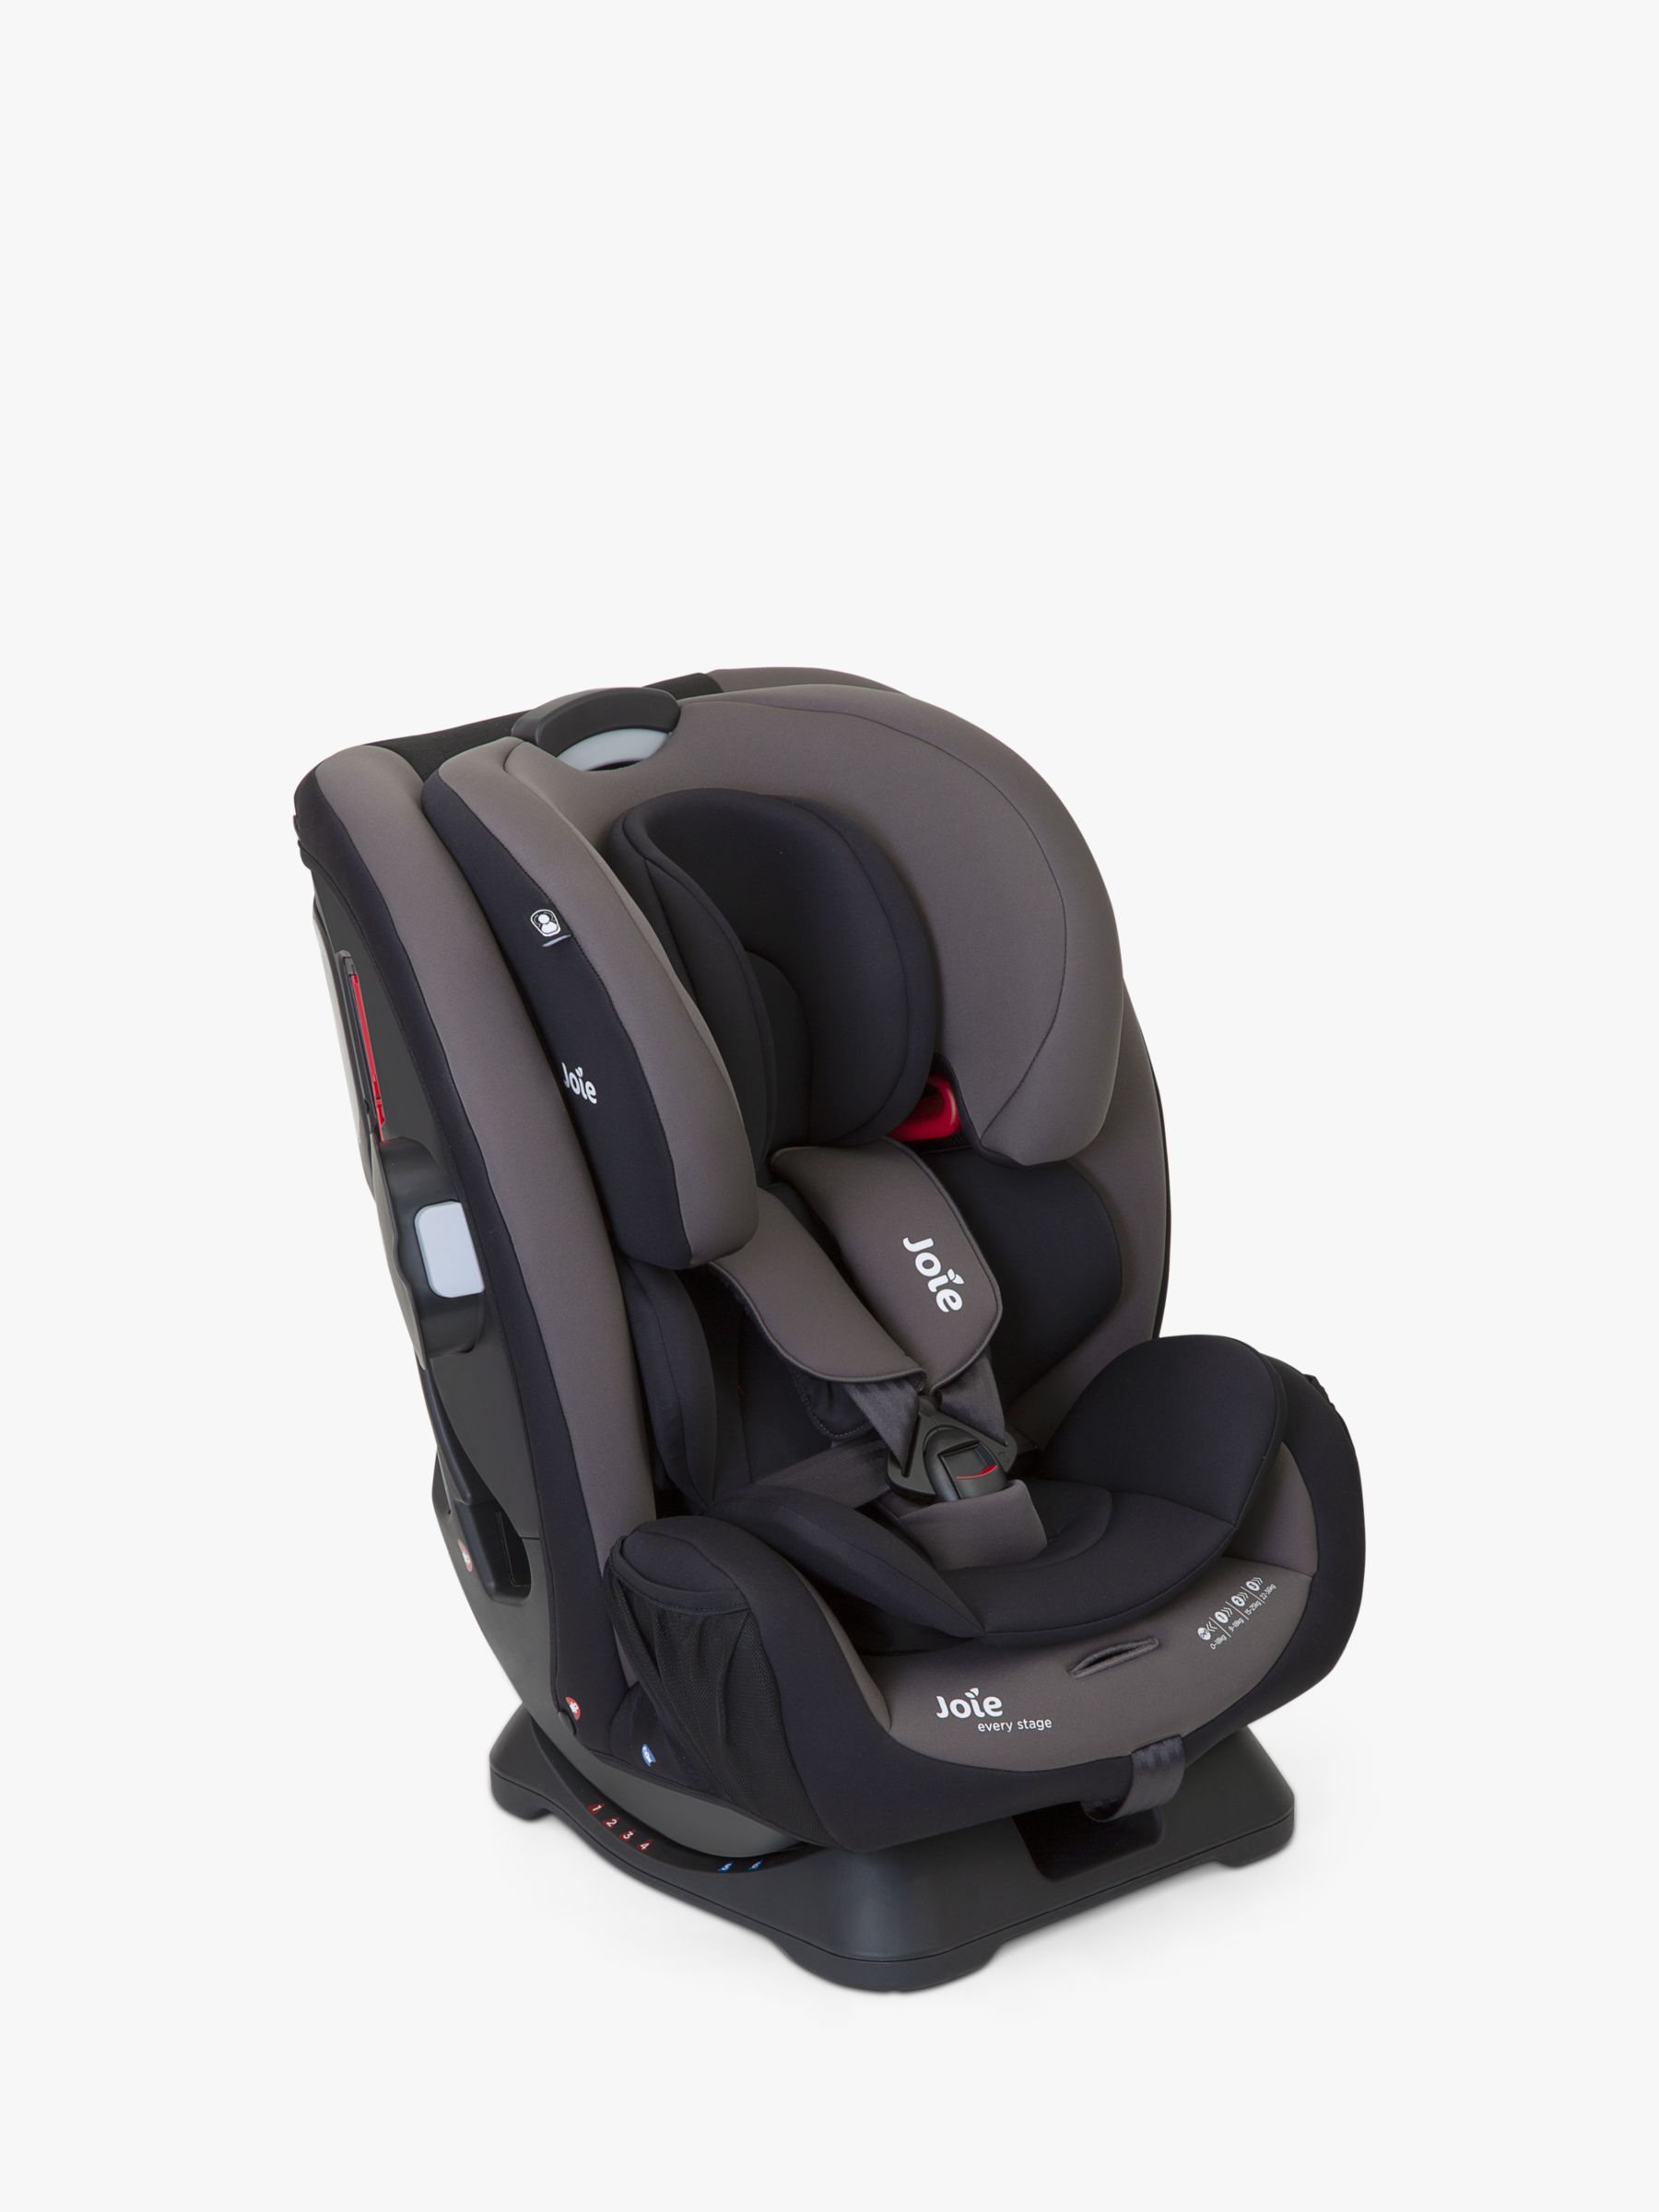 Joie Baby Every Stage Group 0+/1/2/3 Car Seat